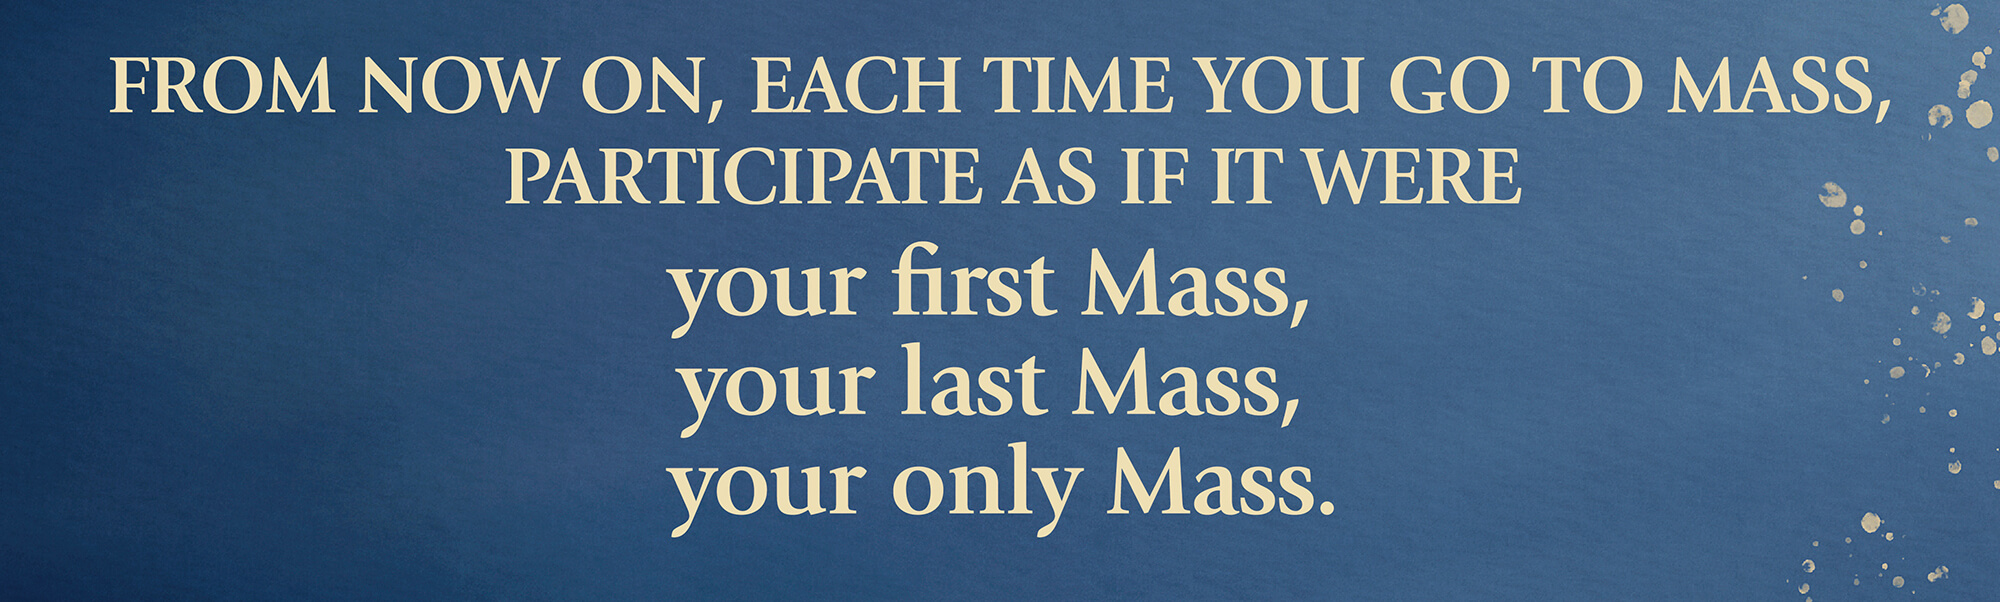 Image of the following text: From now on, each time you go to mass, participate as if it were your first mass, your last mass, your only mass.